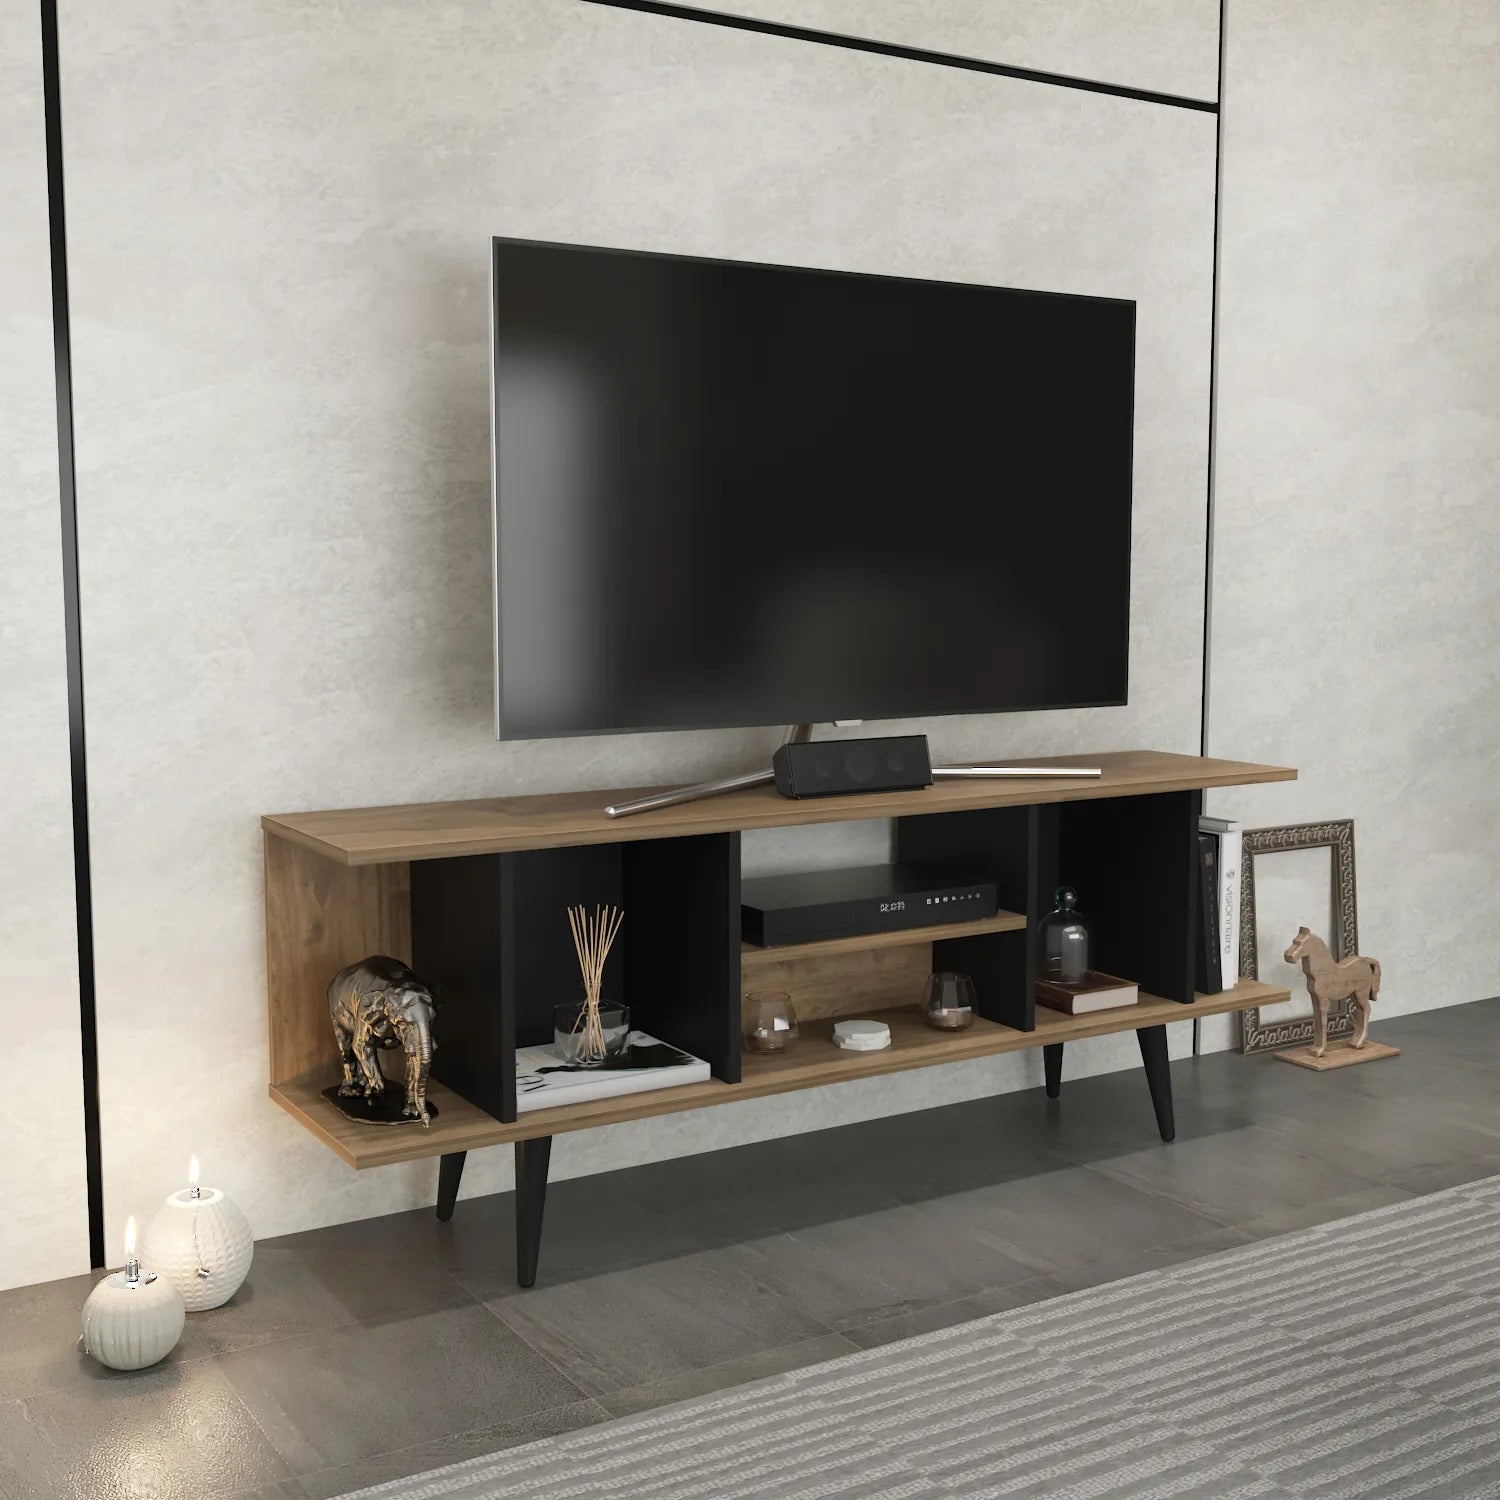 Akya 63 inch Wide TV Stand Media Console for TVs up to 72 inch